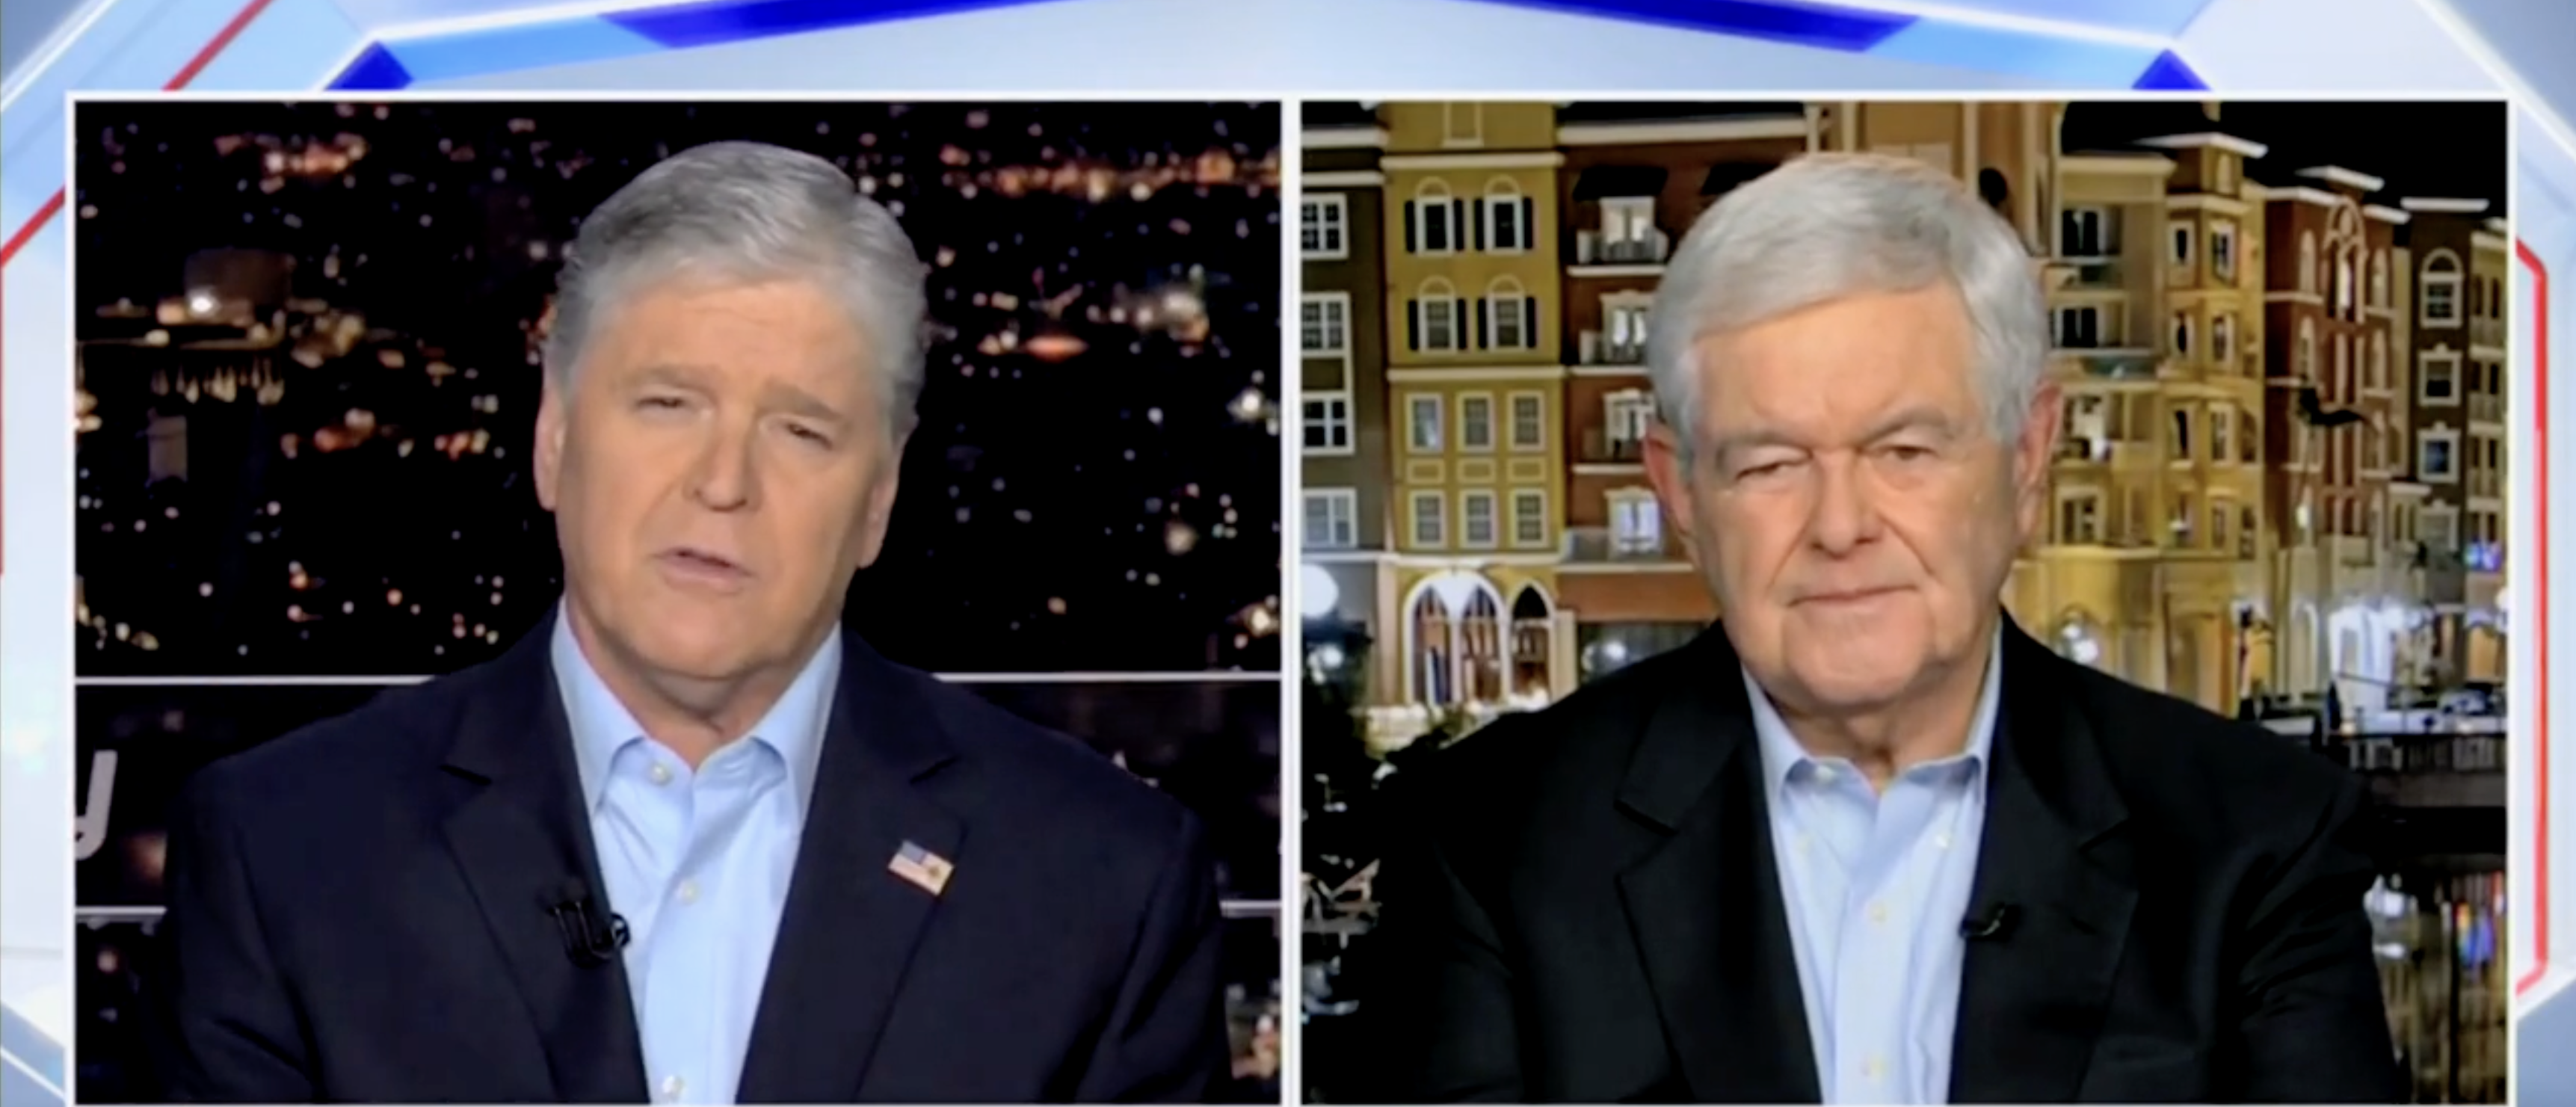 Newt Gingrich Explains Why US Is At ‘Crossroads’ Between ‘Civilization’ And ‘Collapse’